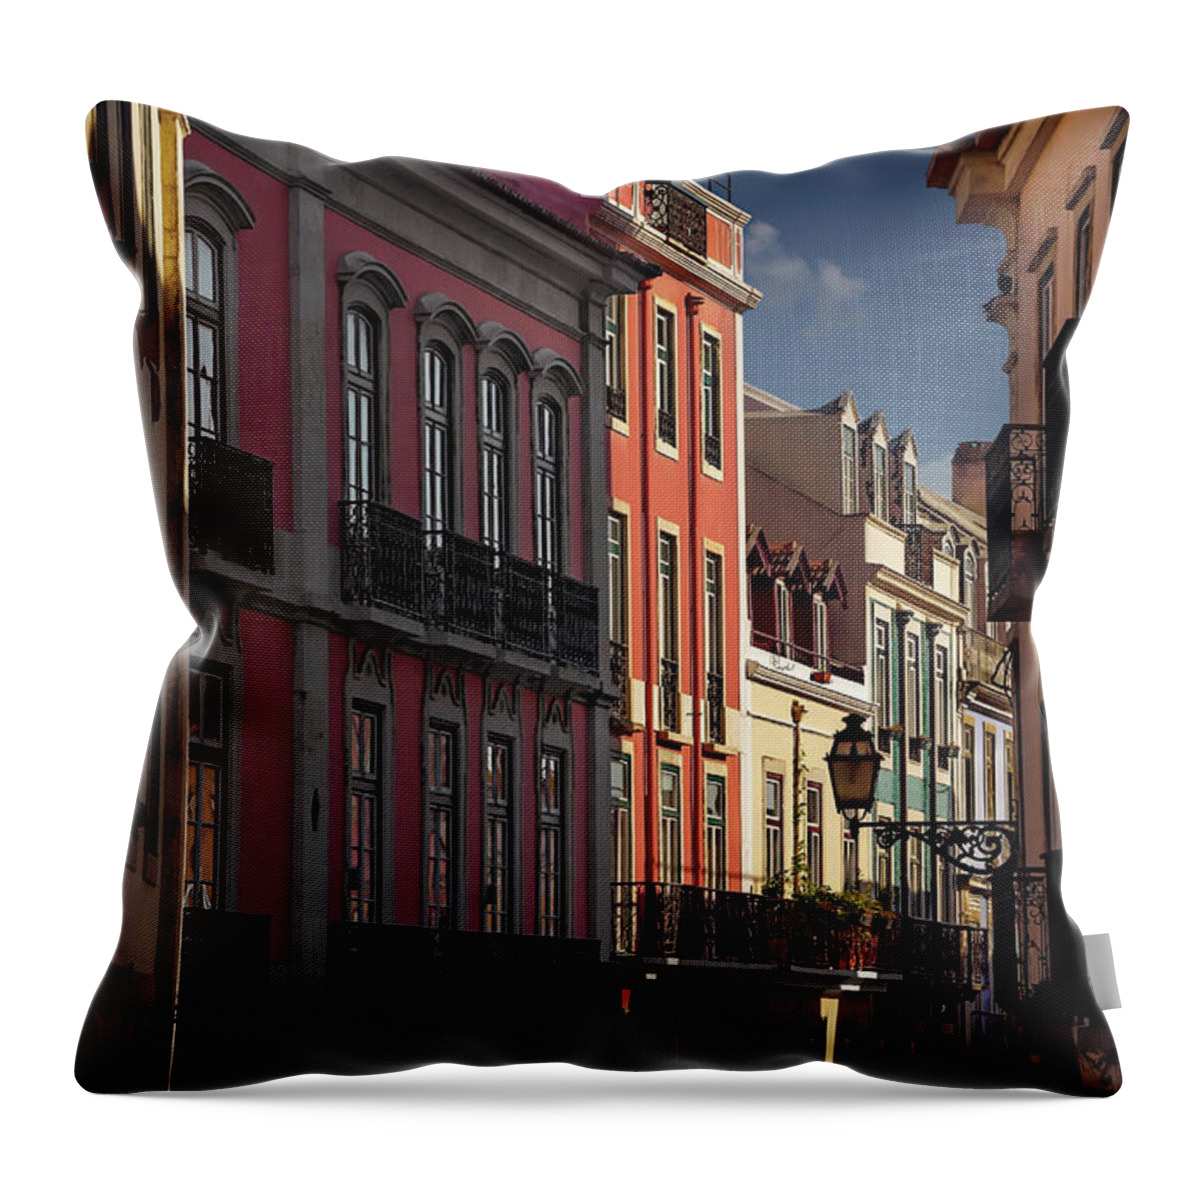 Lisbon Throw Pillow featuring the photograph Colourful Architecture in Lisbon Portugal by Carol Japp